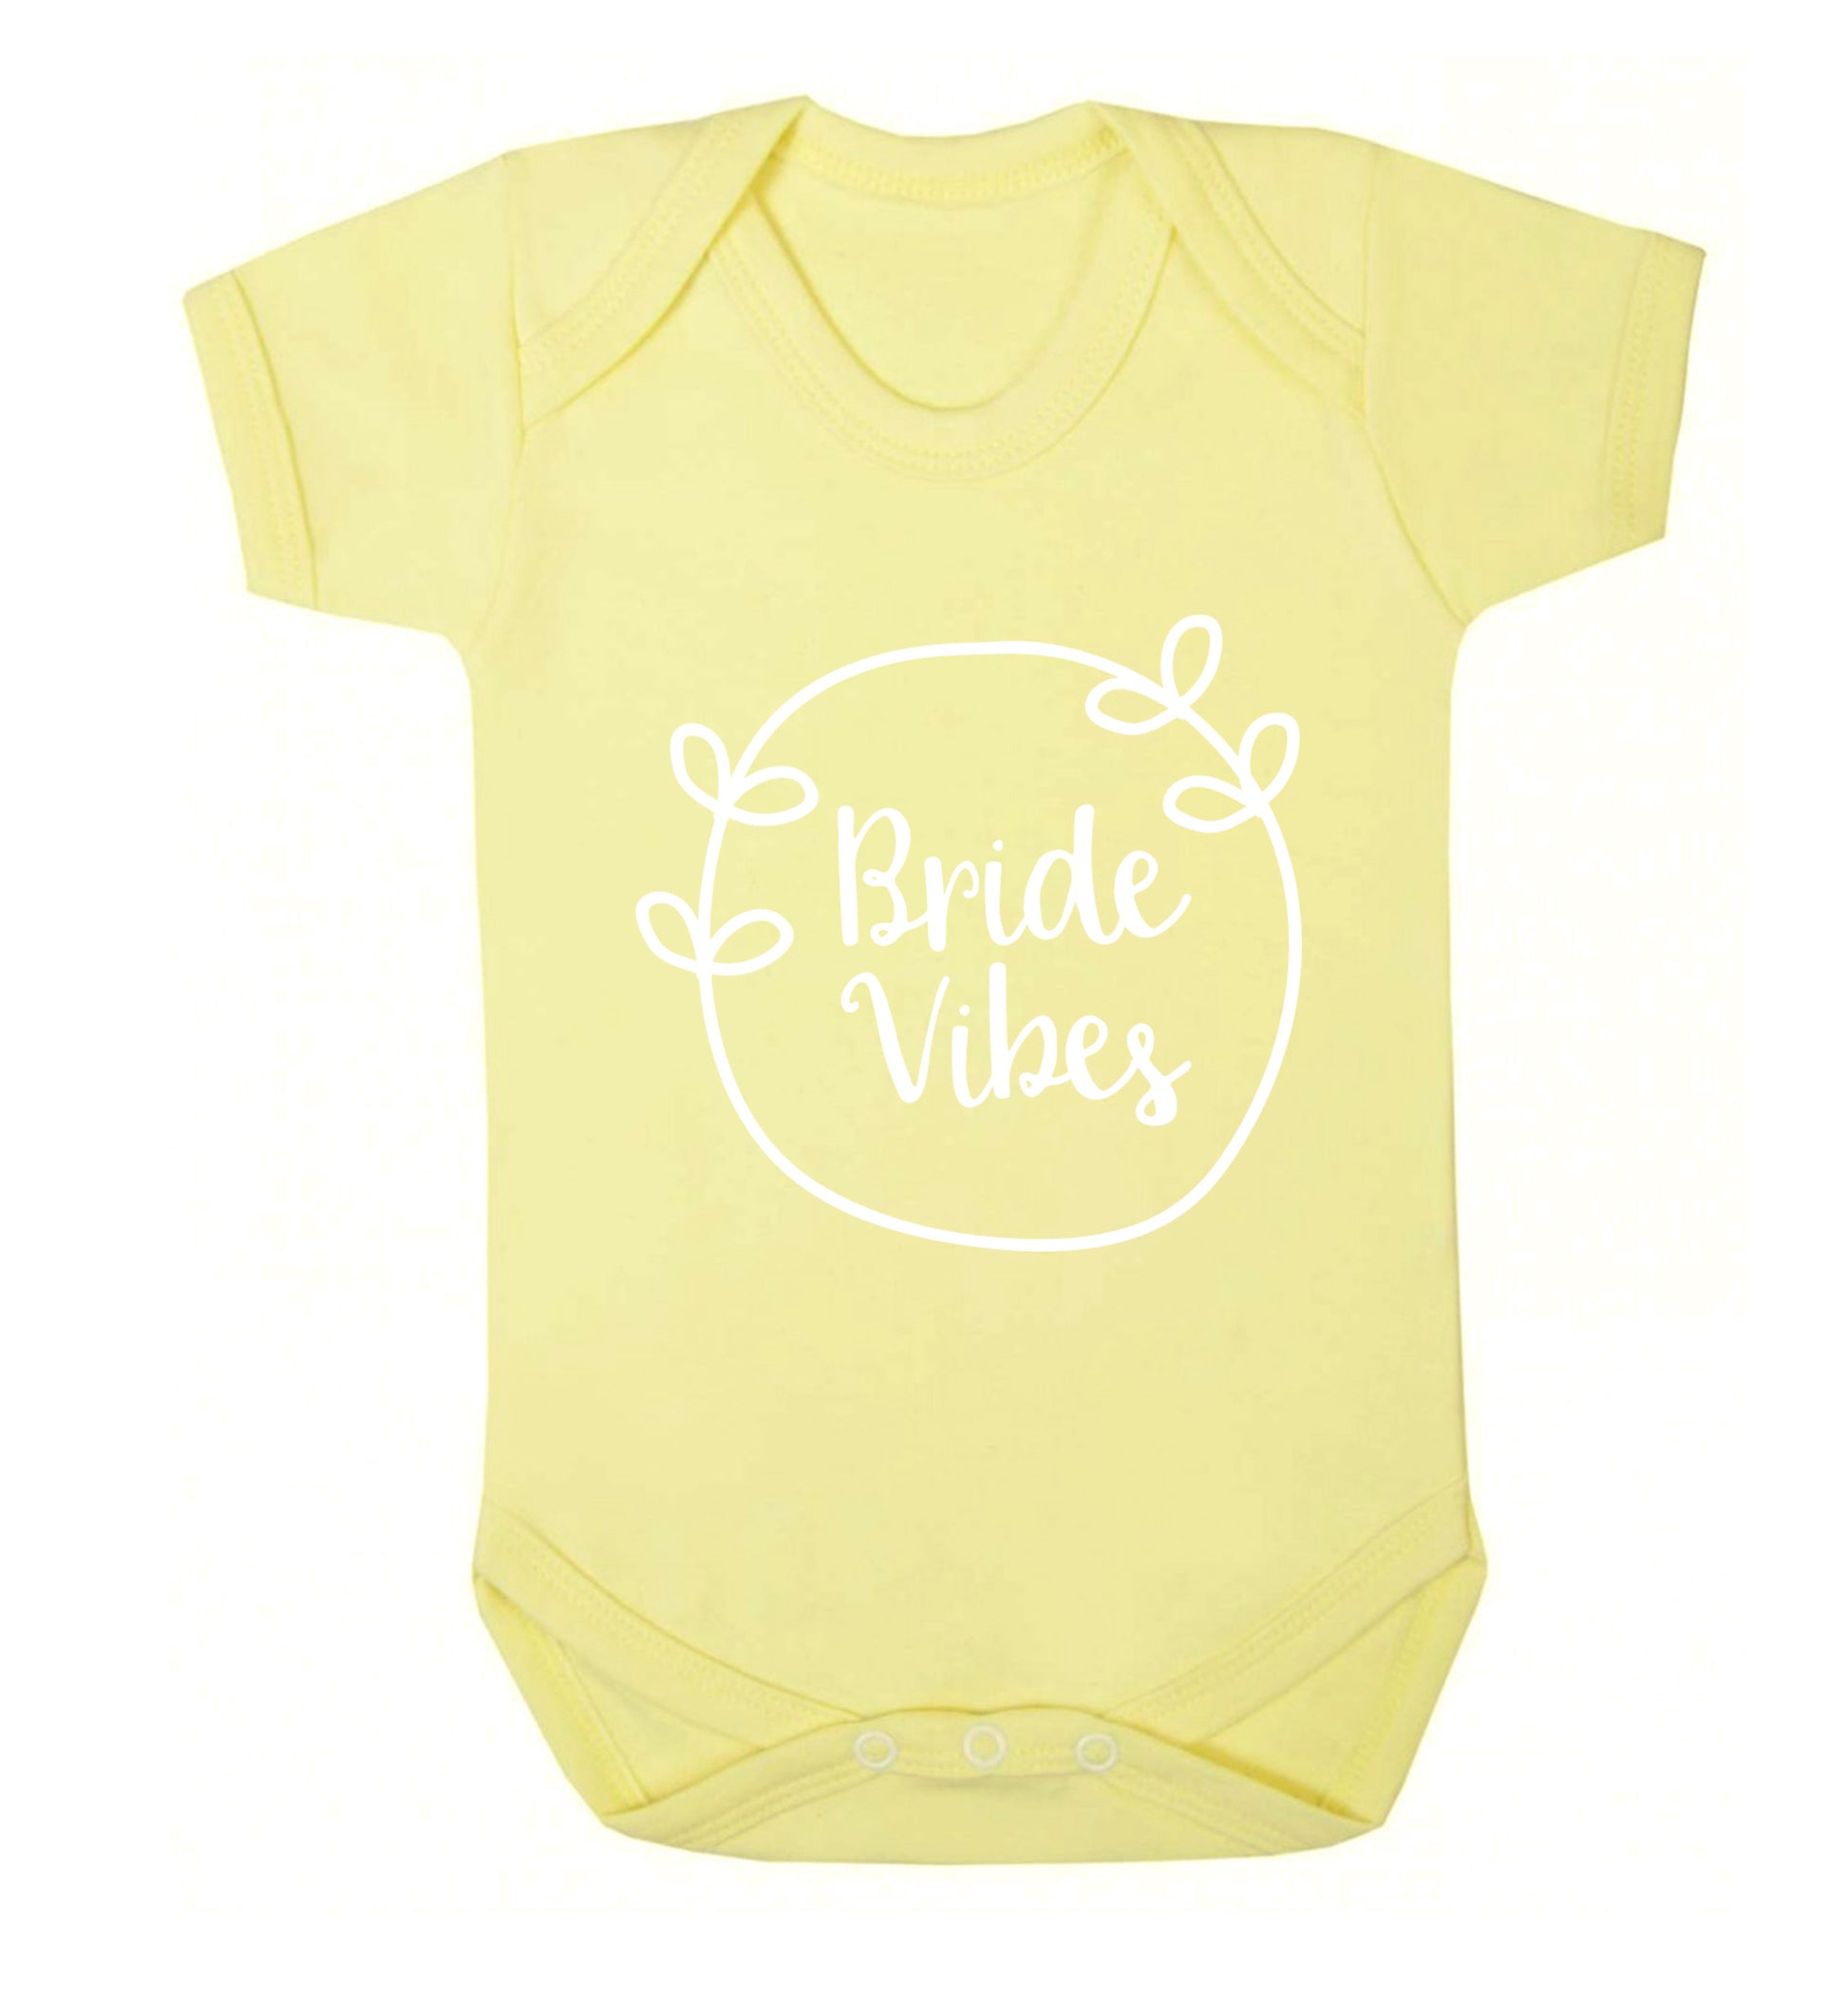 Bride Vibes Baby Vest pale yellow 18-24 months